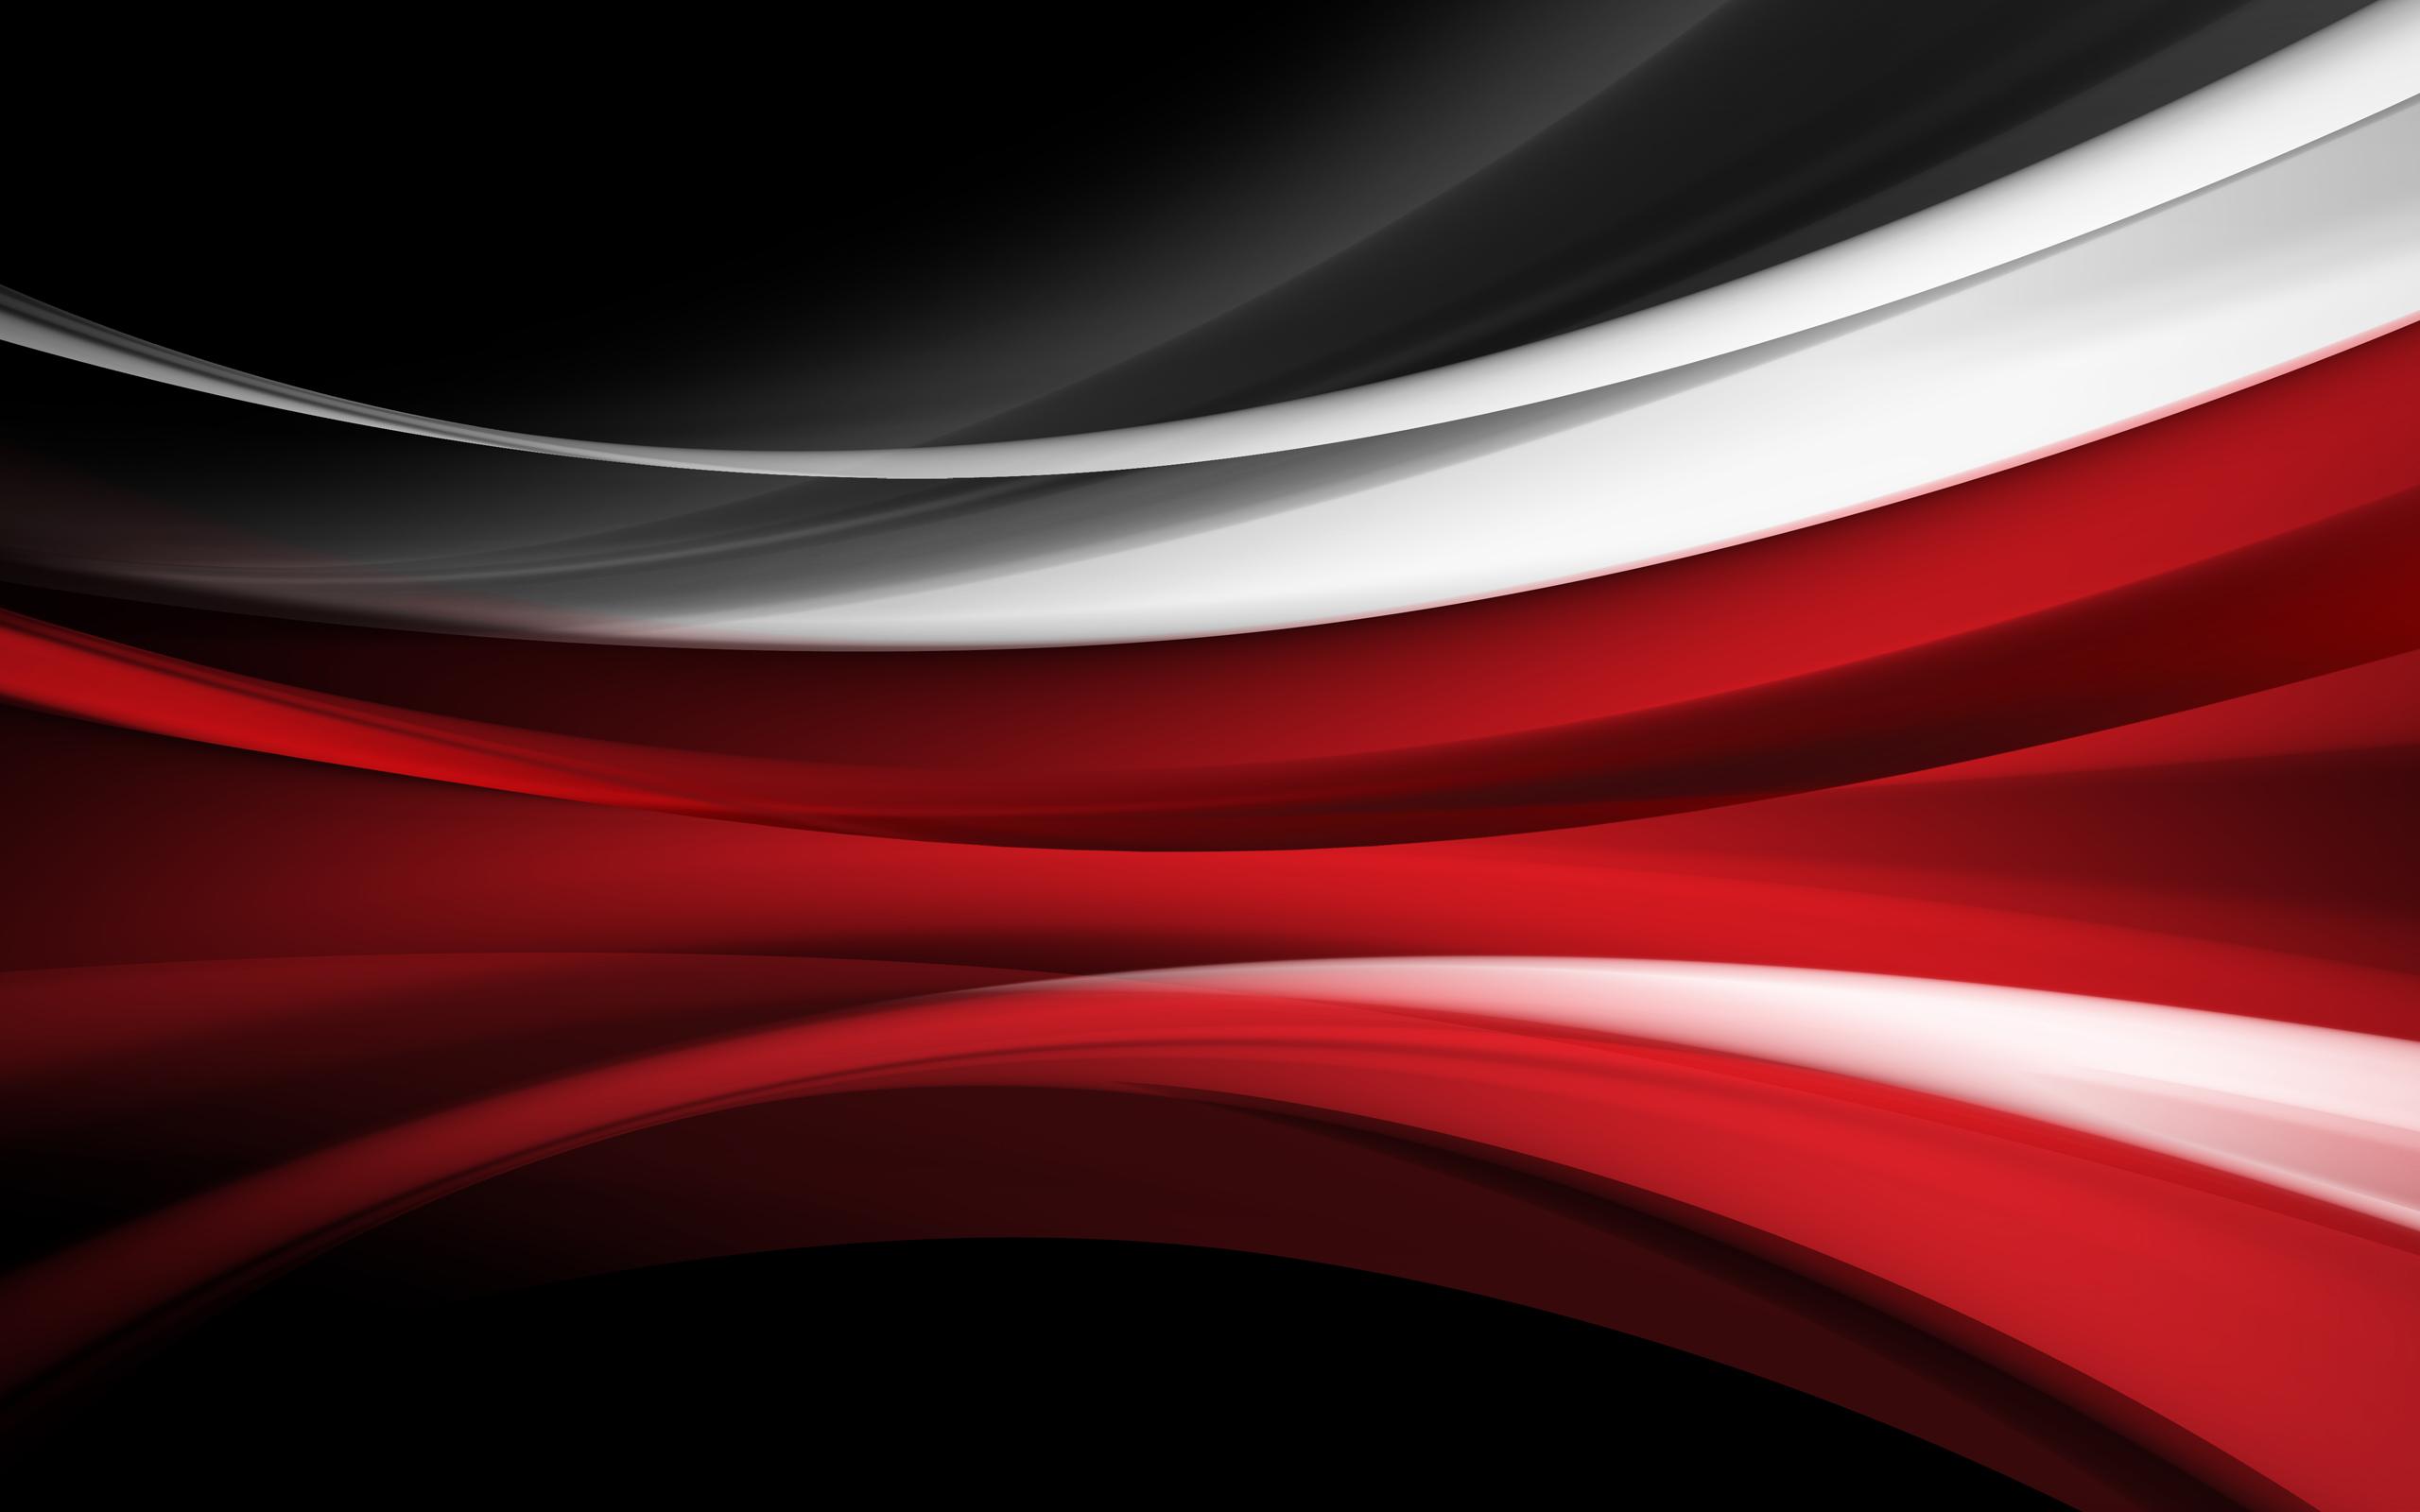 Free HD Black And Red Wallpapers | PixelsTalk.Net